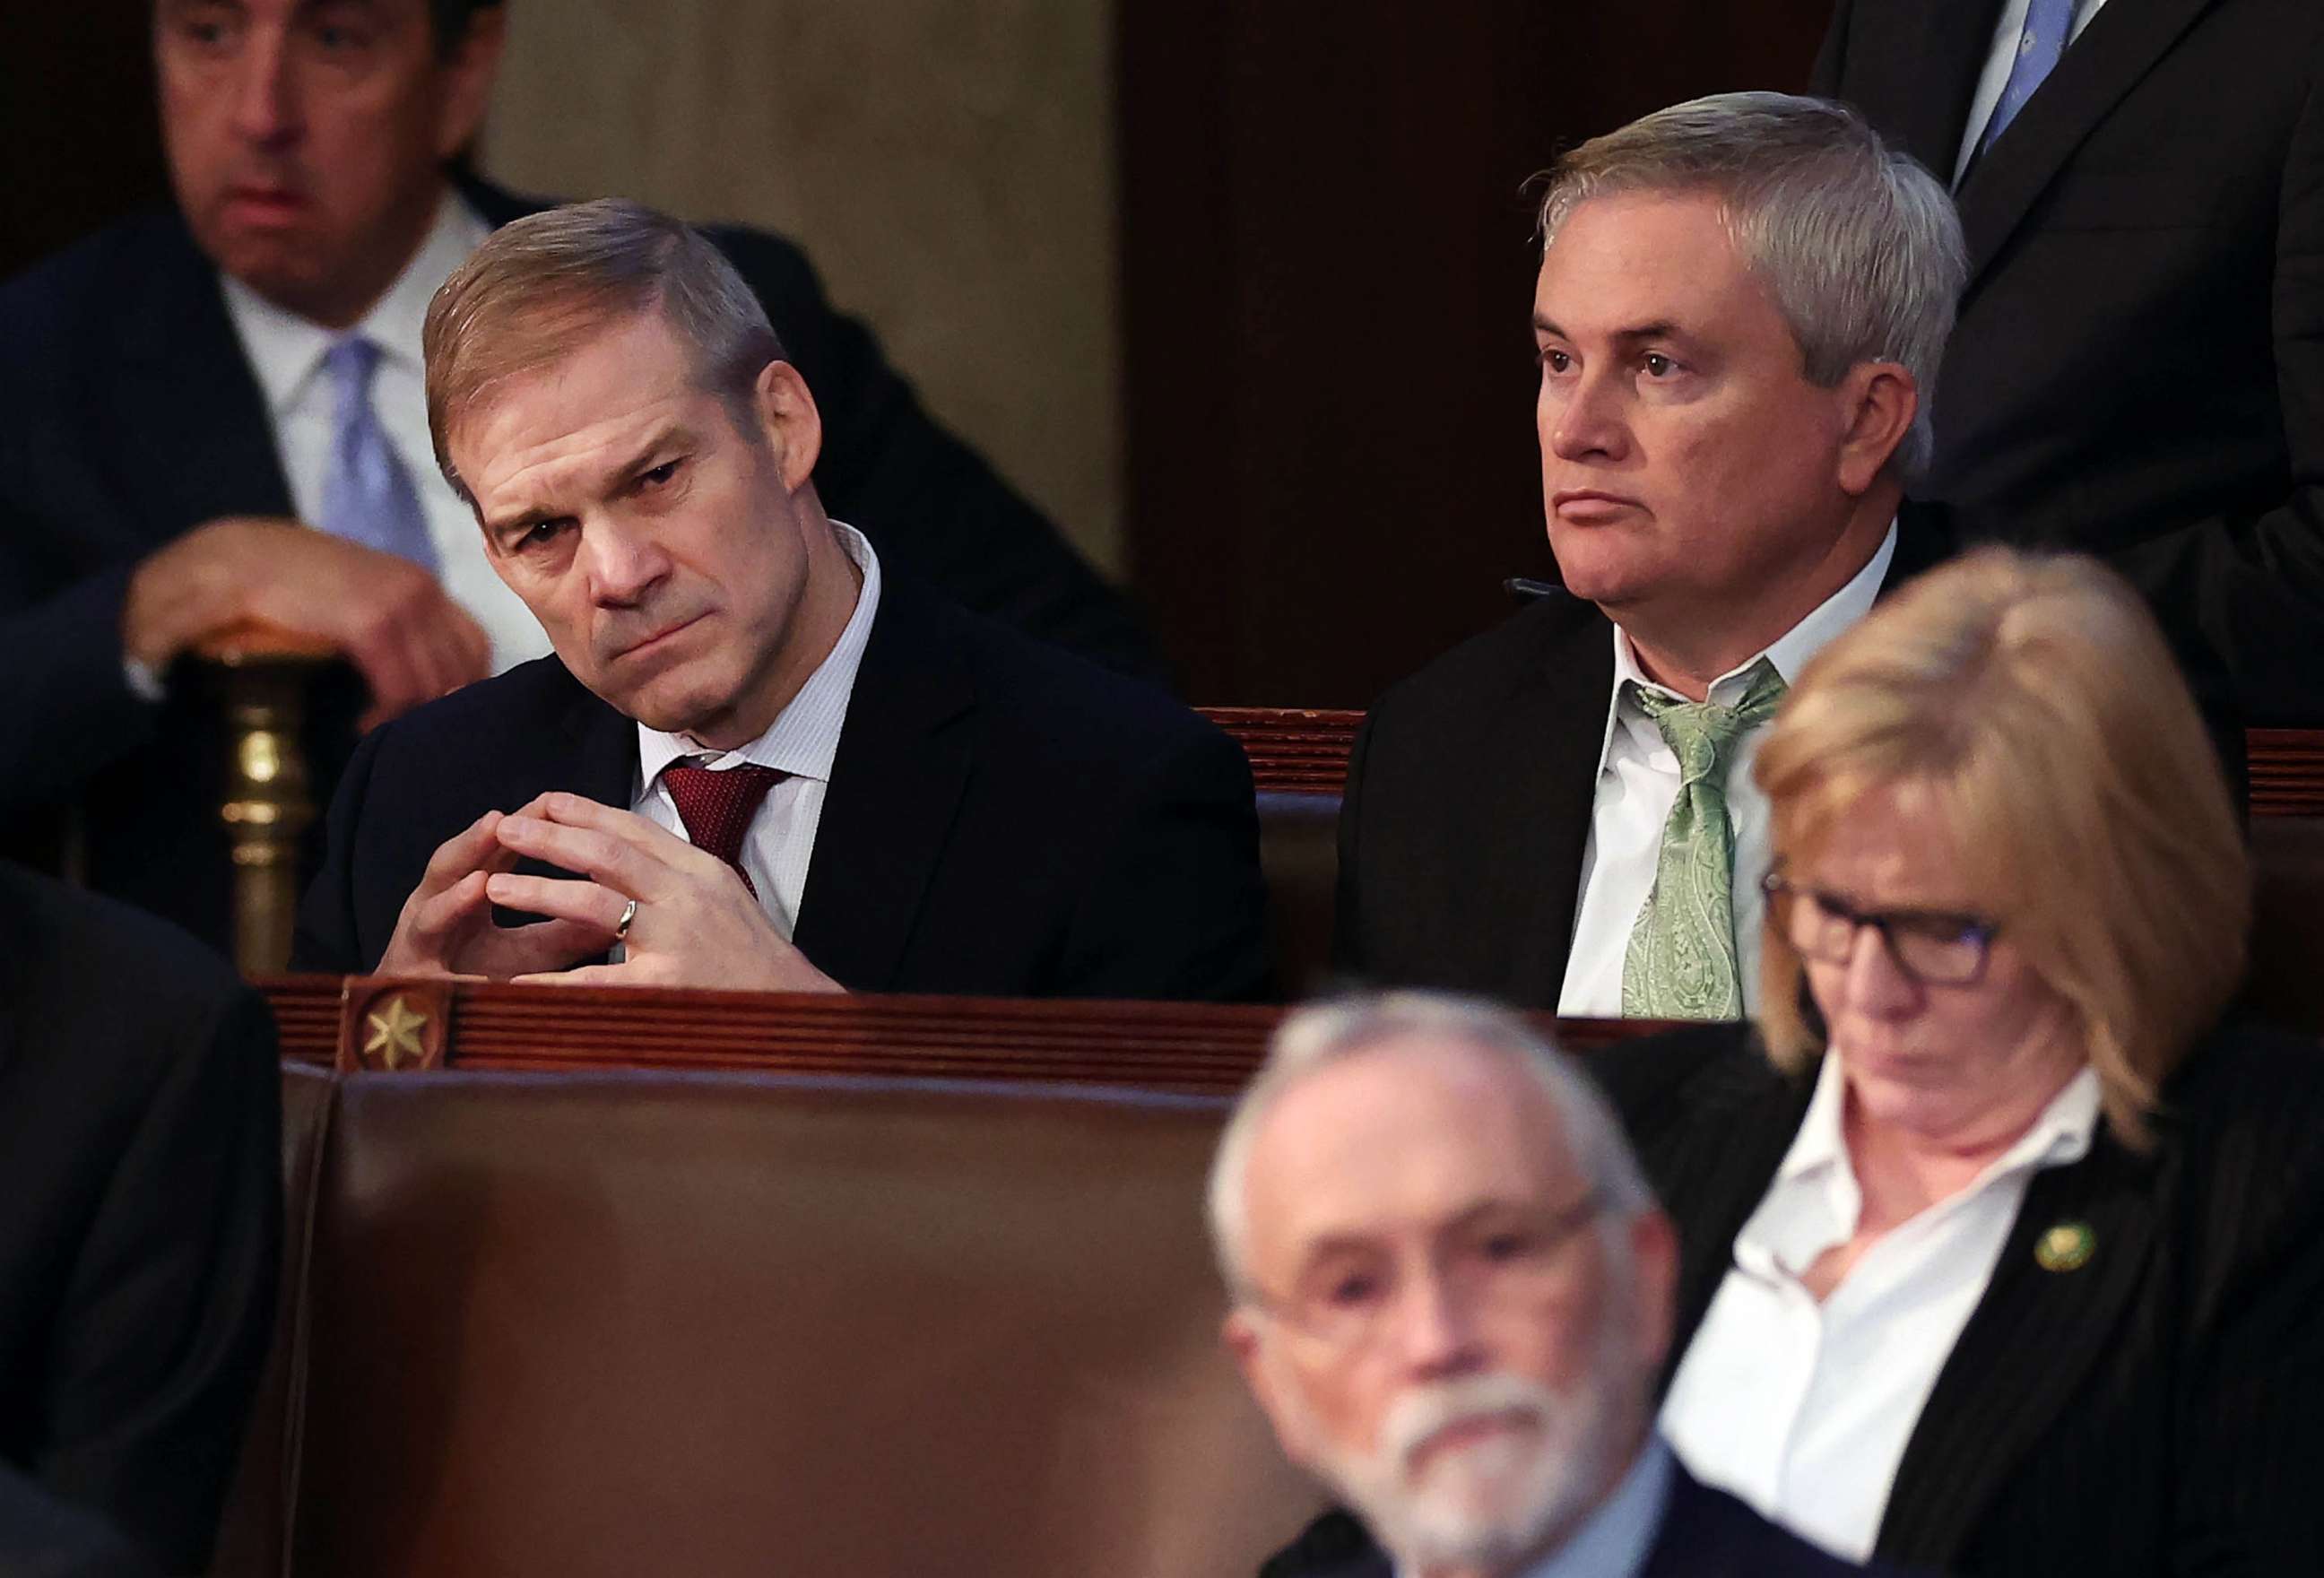 PHOTO: U.S. Rep.-elect Jim Jordan listens to voting in the House Chamber during the fourth day of elections for Speaker of the House at the U.S. Capitol Building, Jan. 06, 2023 in Washington, DC.